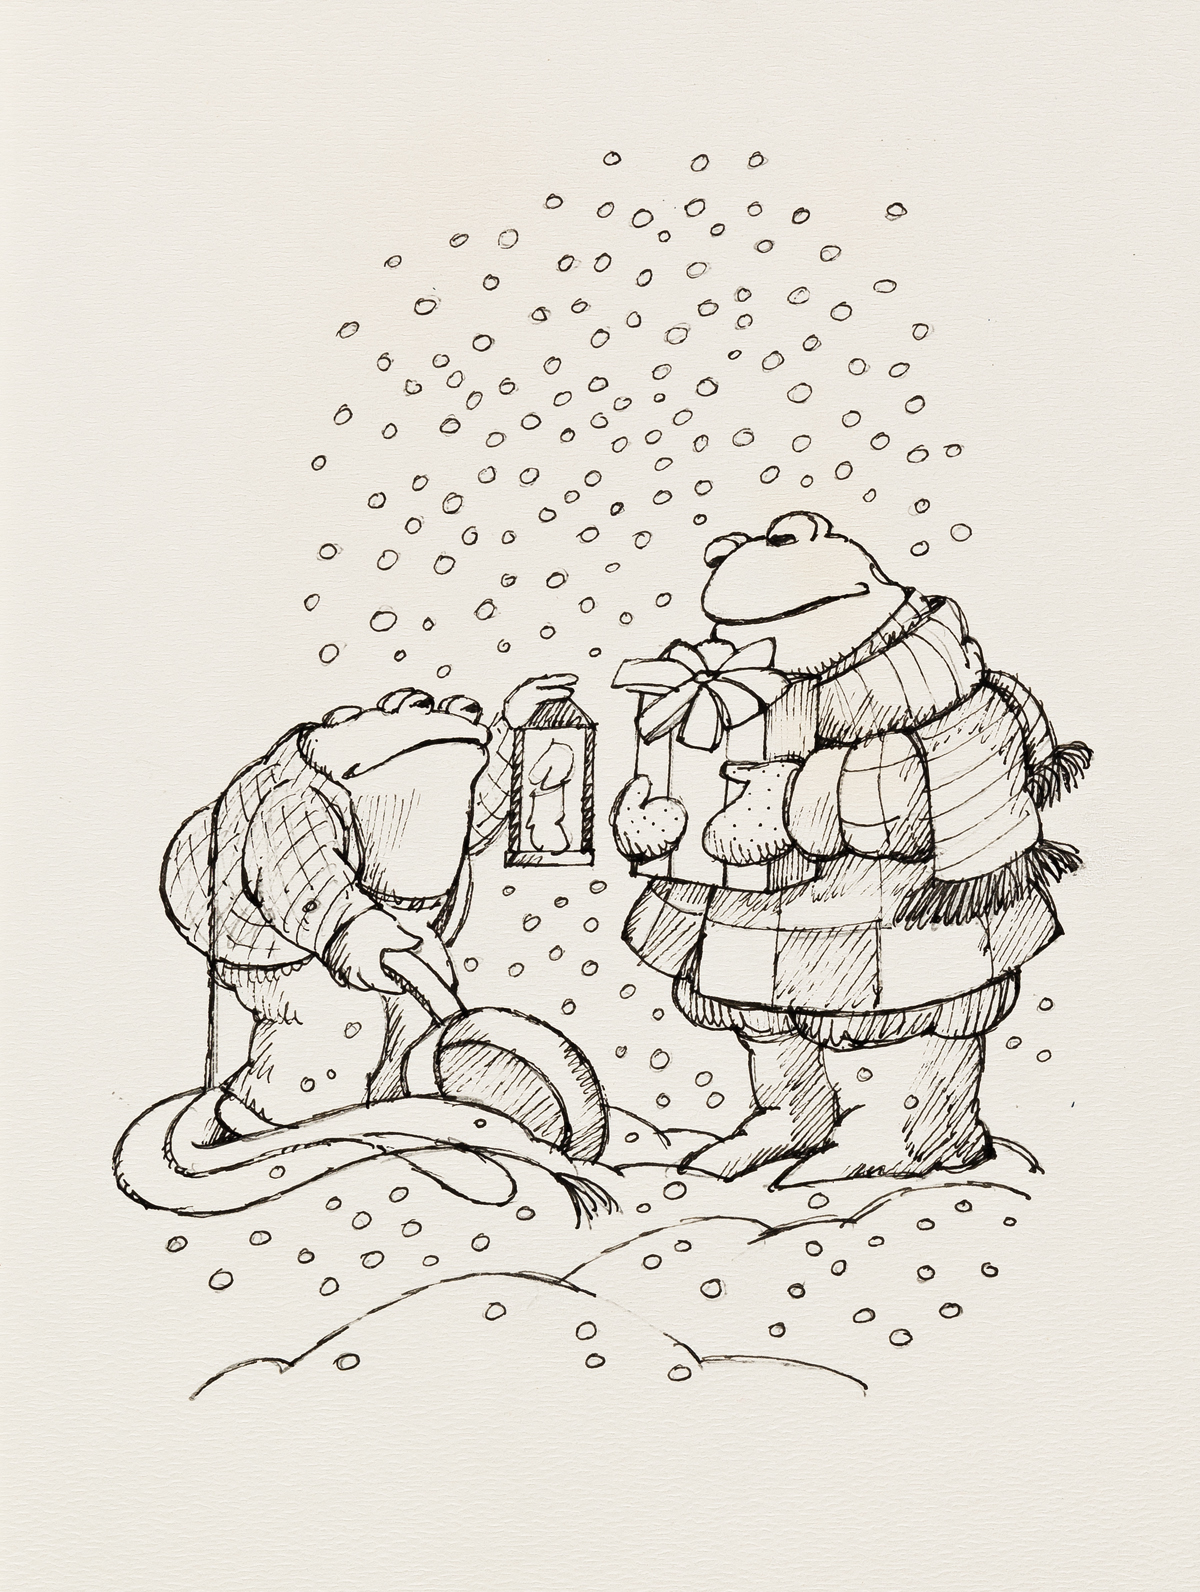 ARNOLD LOBEL (1933-1987). There was Frog.